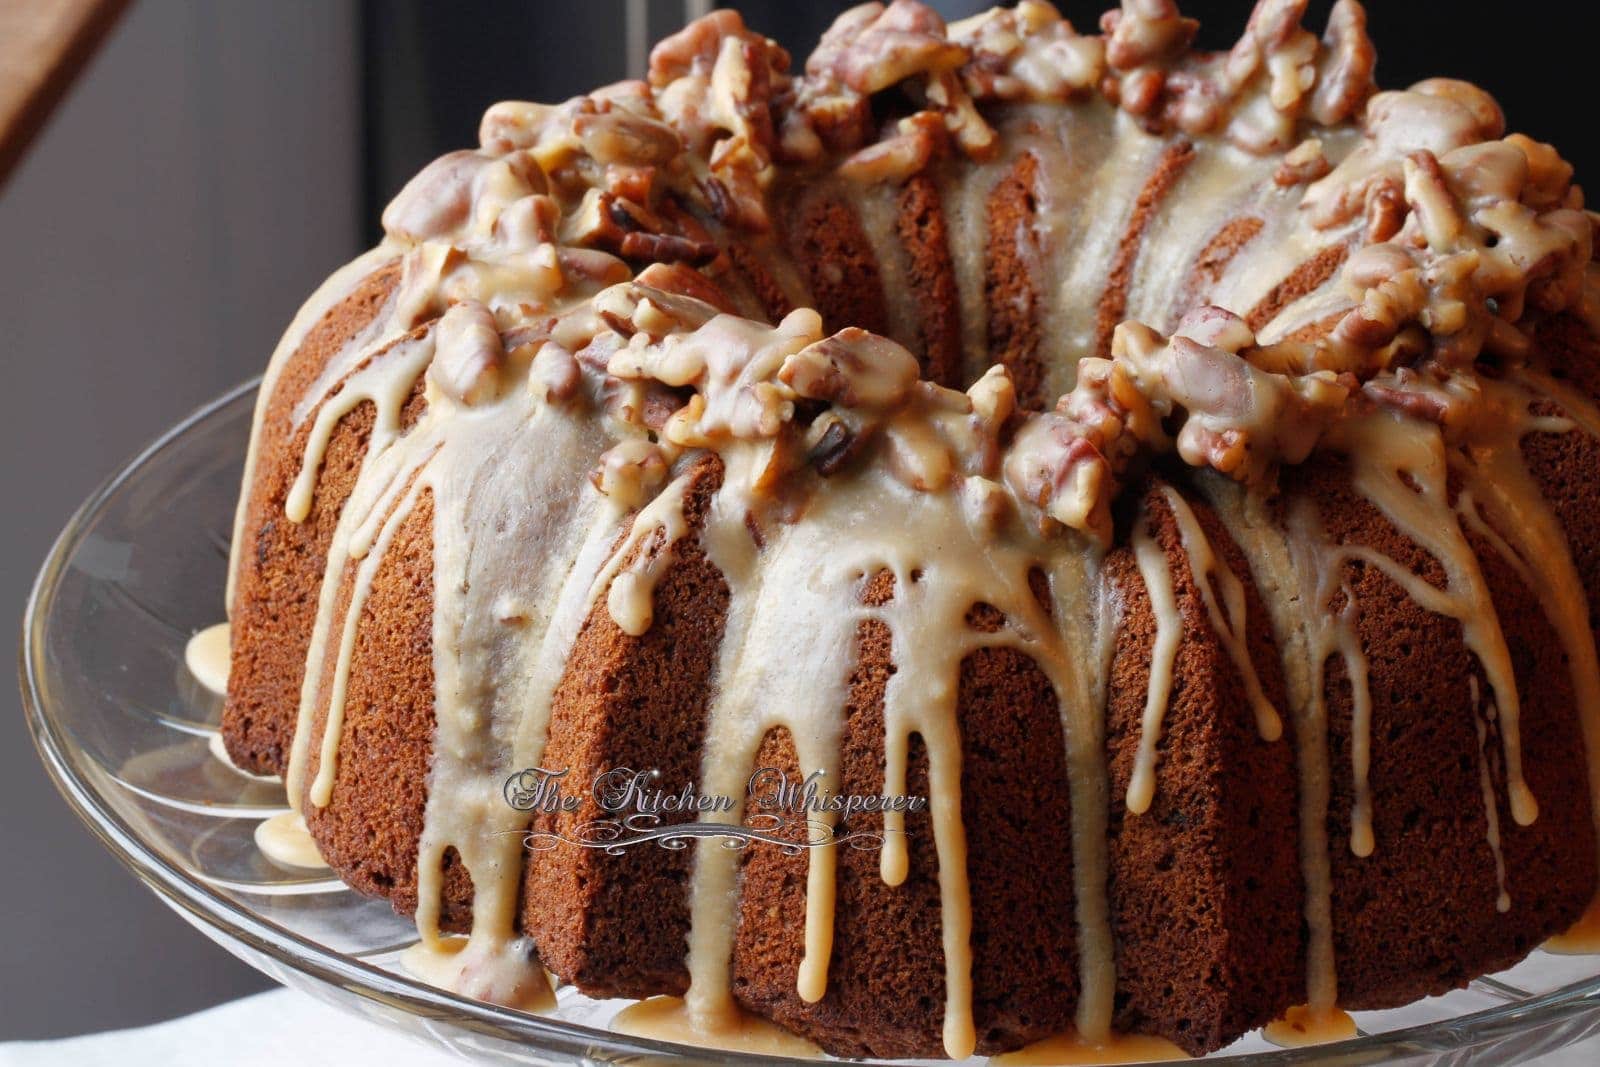 Day 13 - Countdown to Christmas 2014 Sticky Toffee Pudding Bourbon Bundt Cake